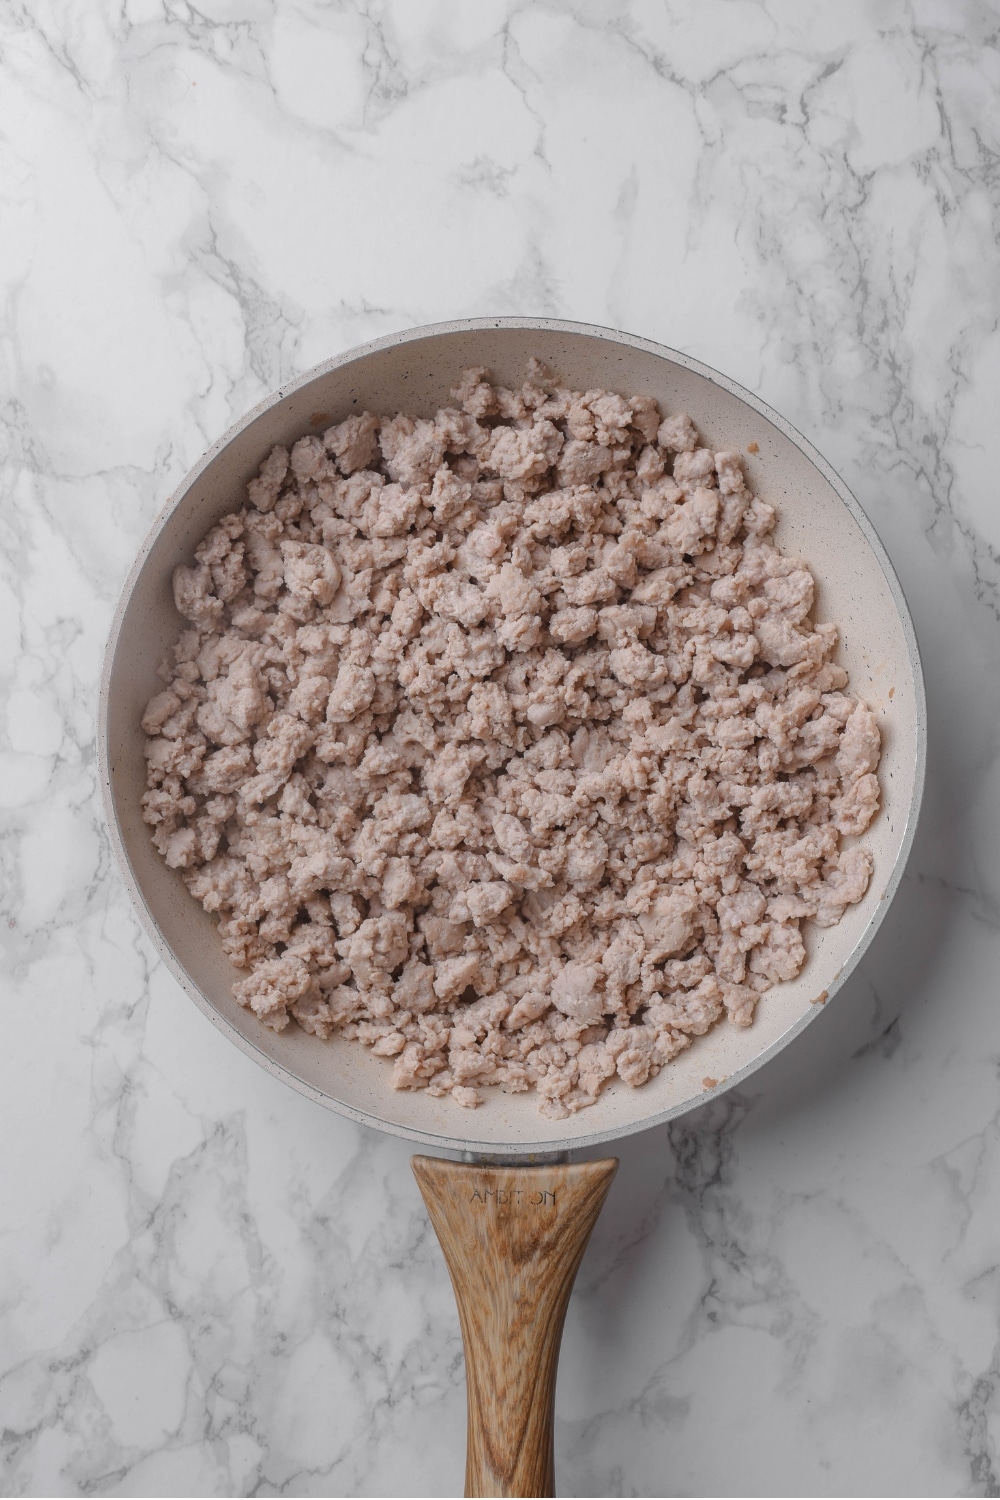 Cooked ground turkey in a white ceramic pan with a wooden handle on top a marble countertop.